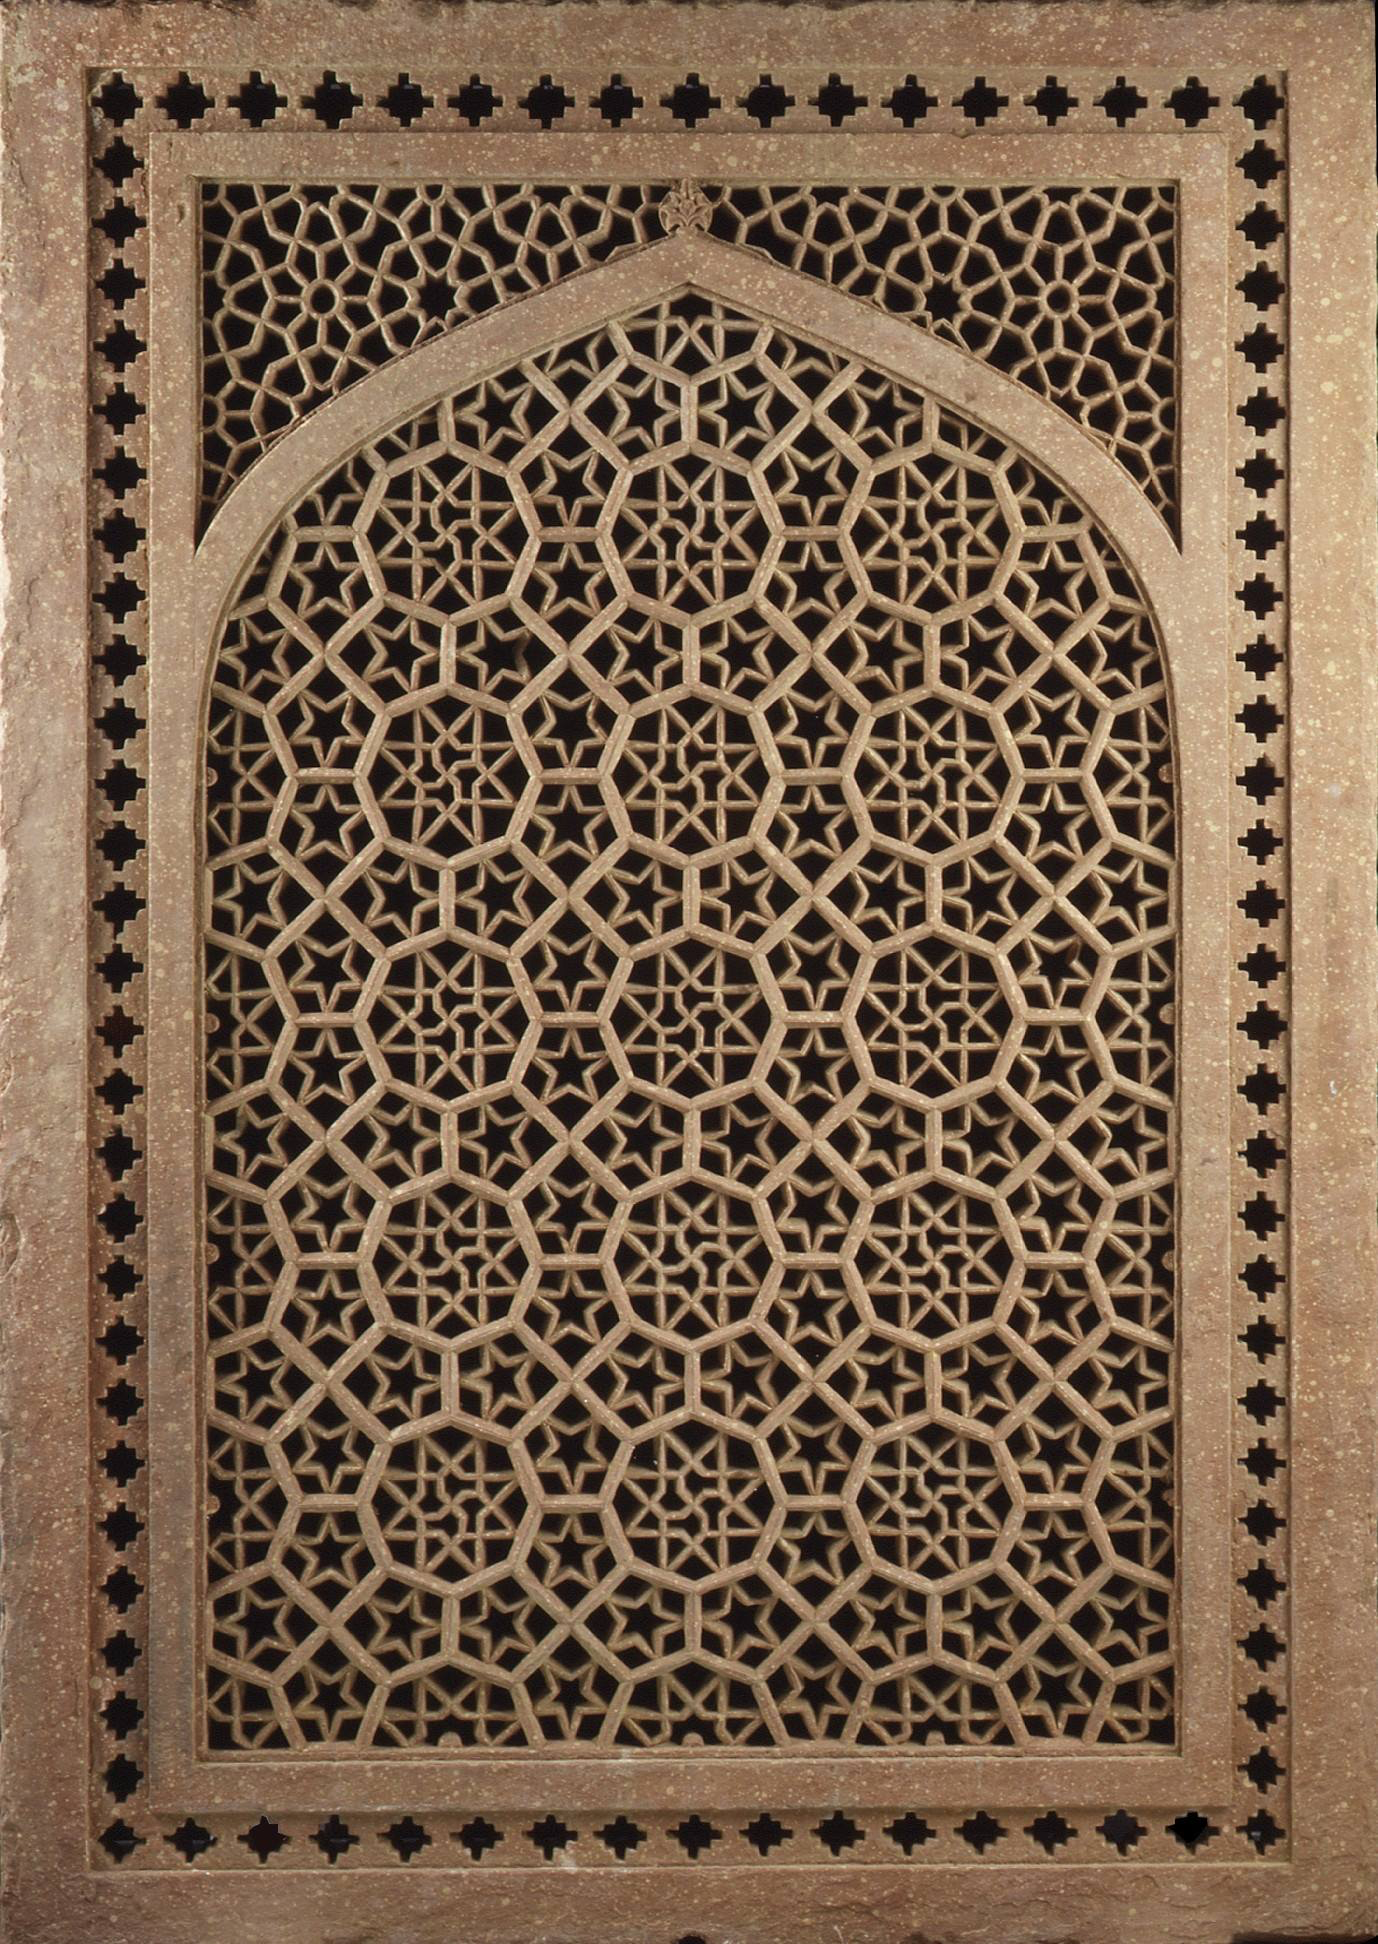 Jali (screen). Second half of the 16th century, India. Red